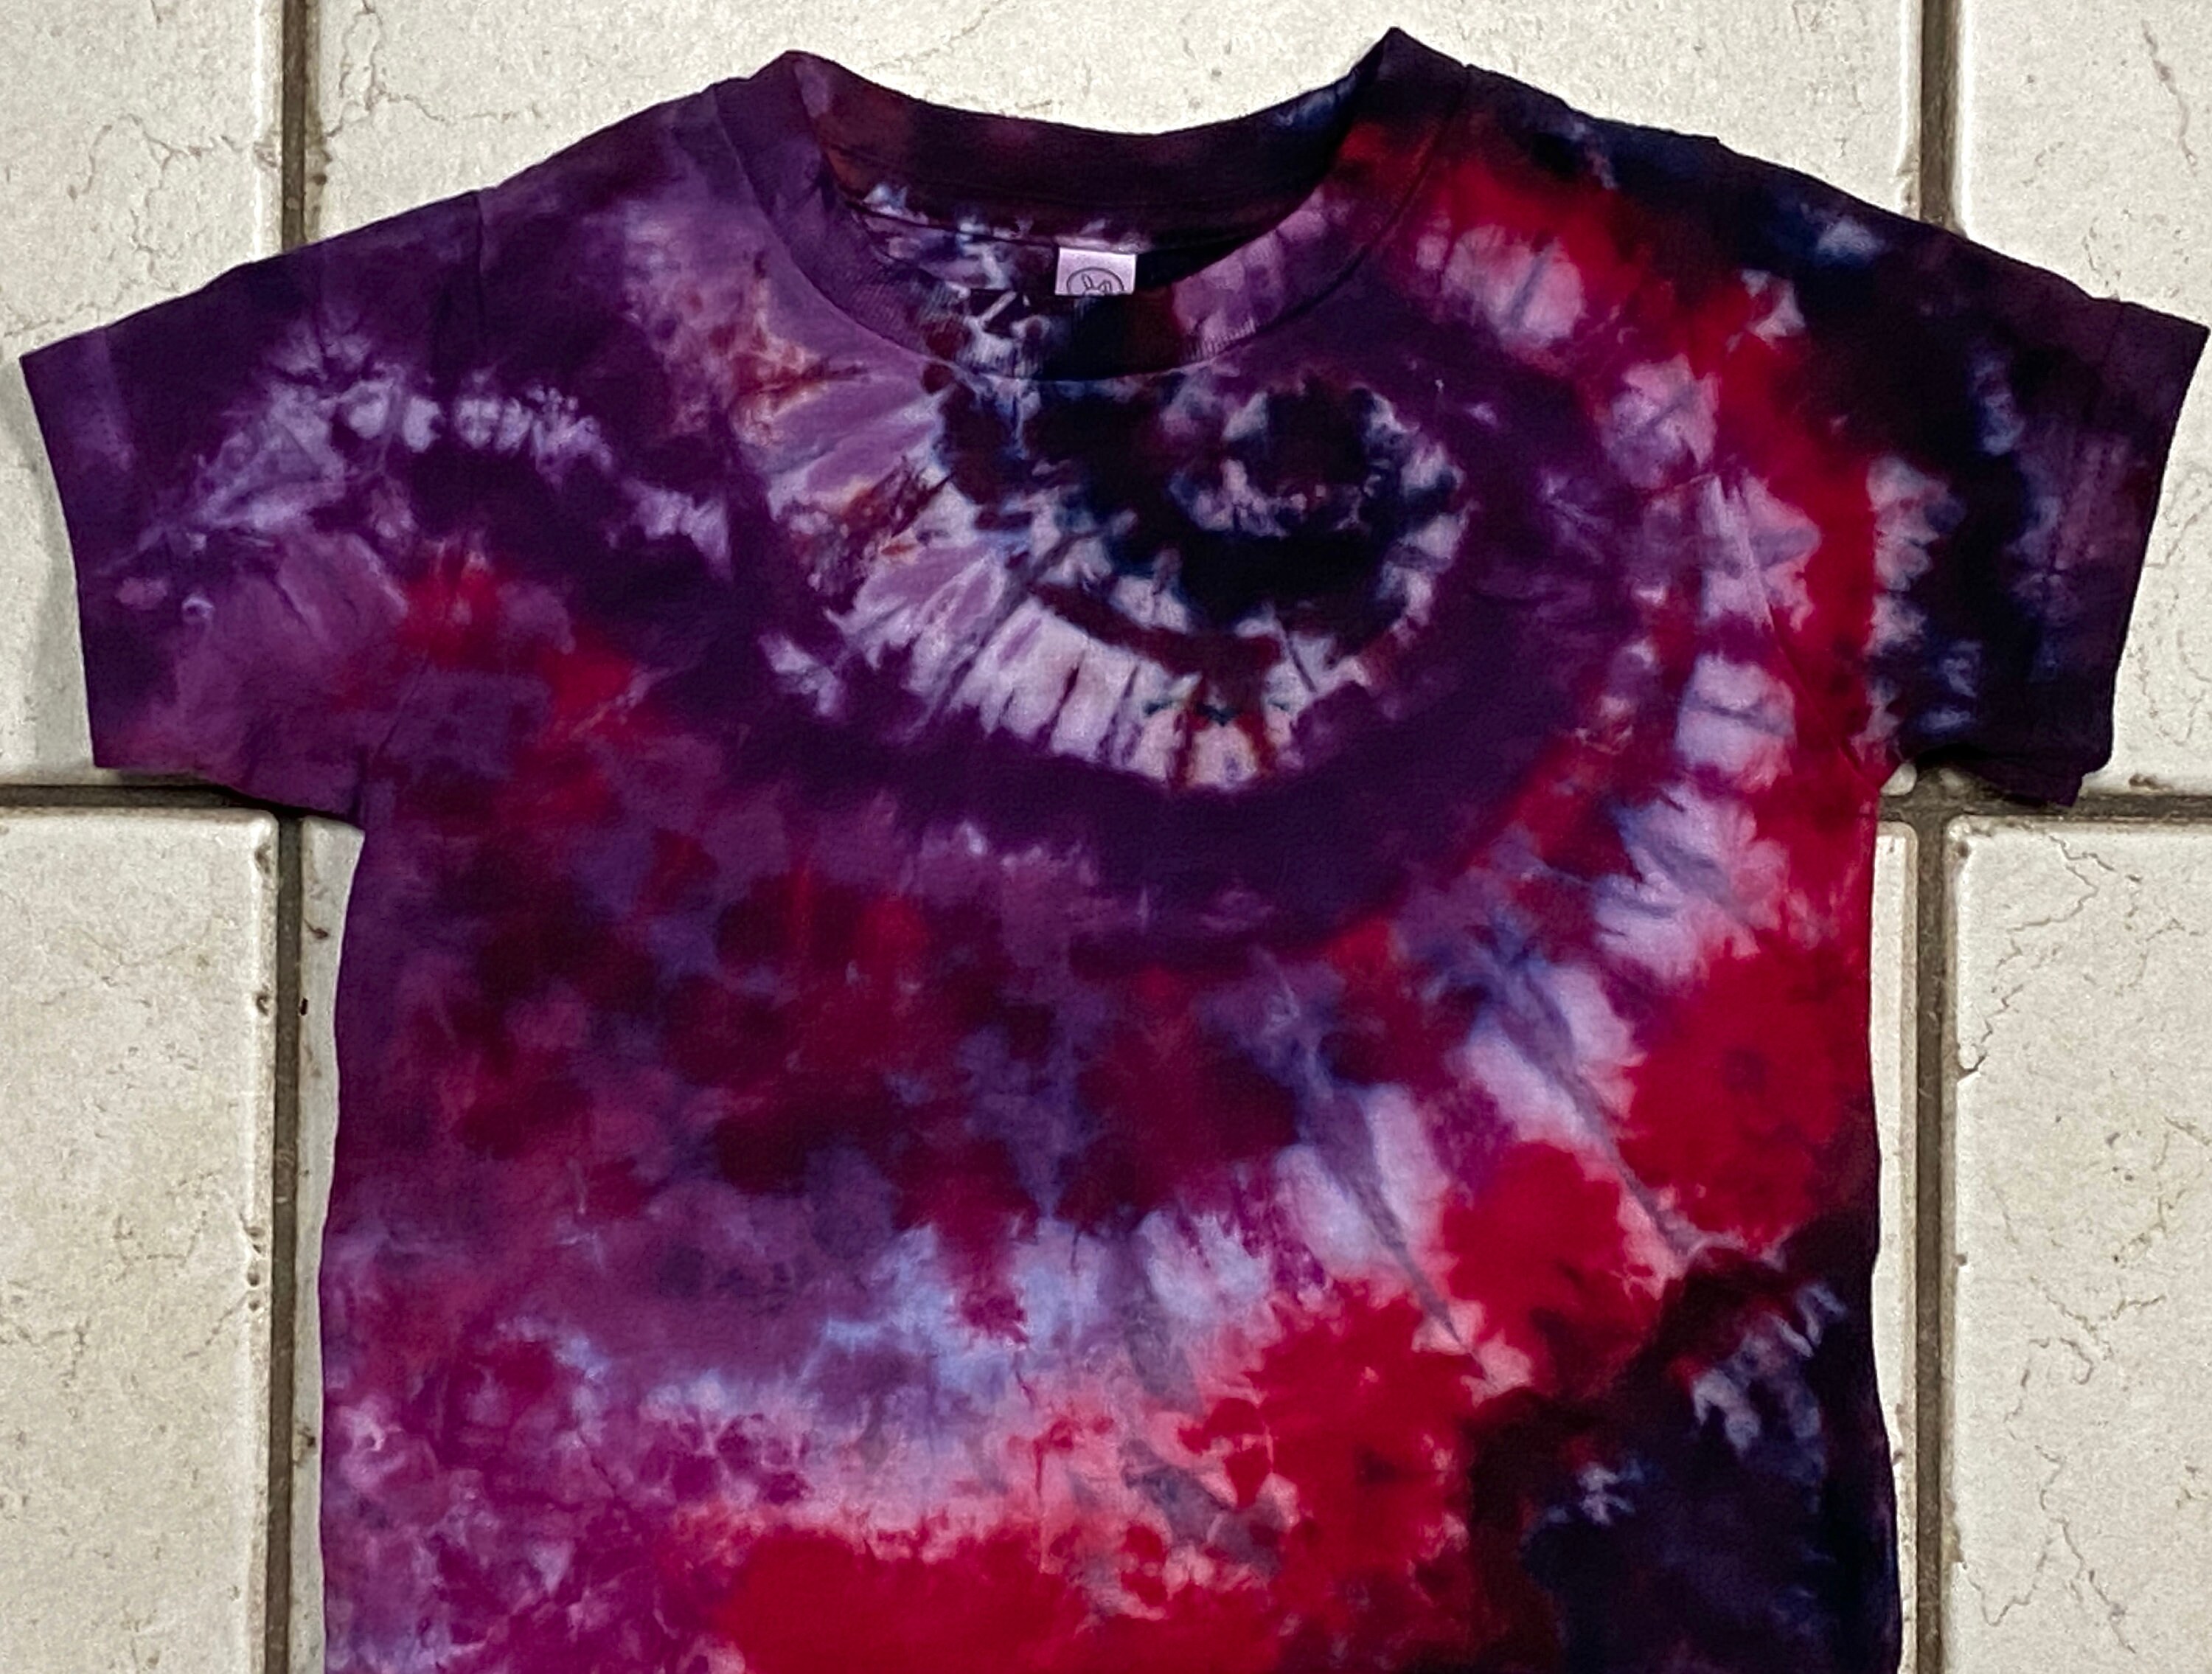 Used Dharma Trading Dyes, reverse bleached then dyed. : r/tiedye